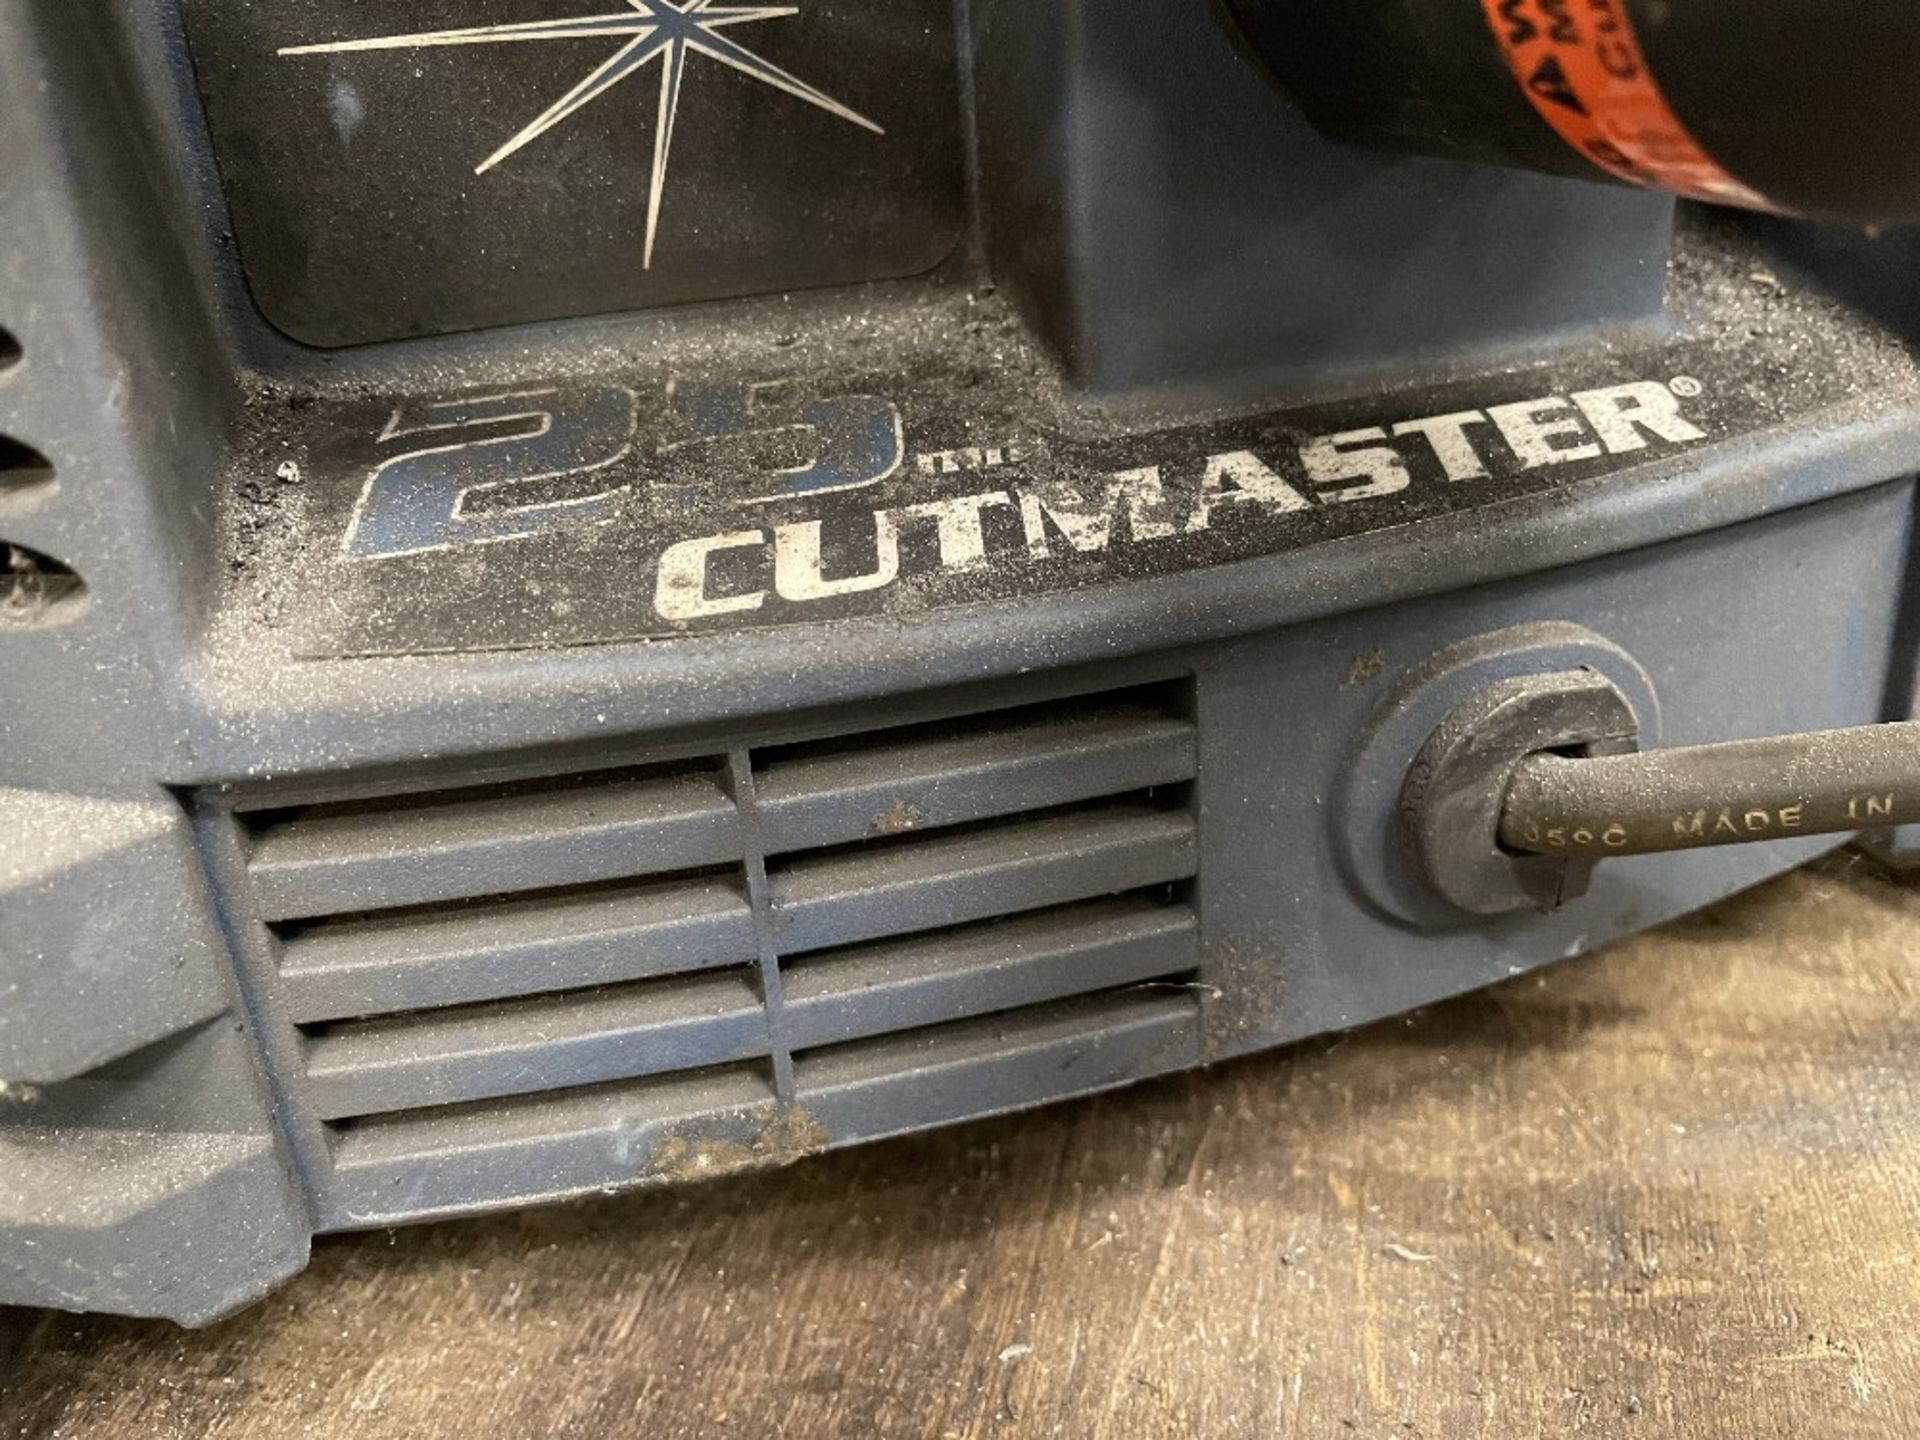 Thermal Dynamics Cutmaster 25mm Plasma Cutter - Image 2 of 5